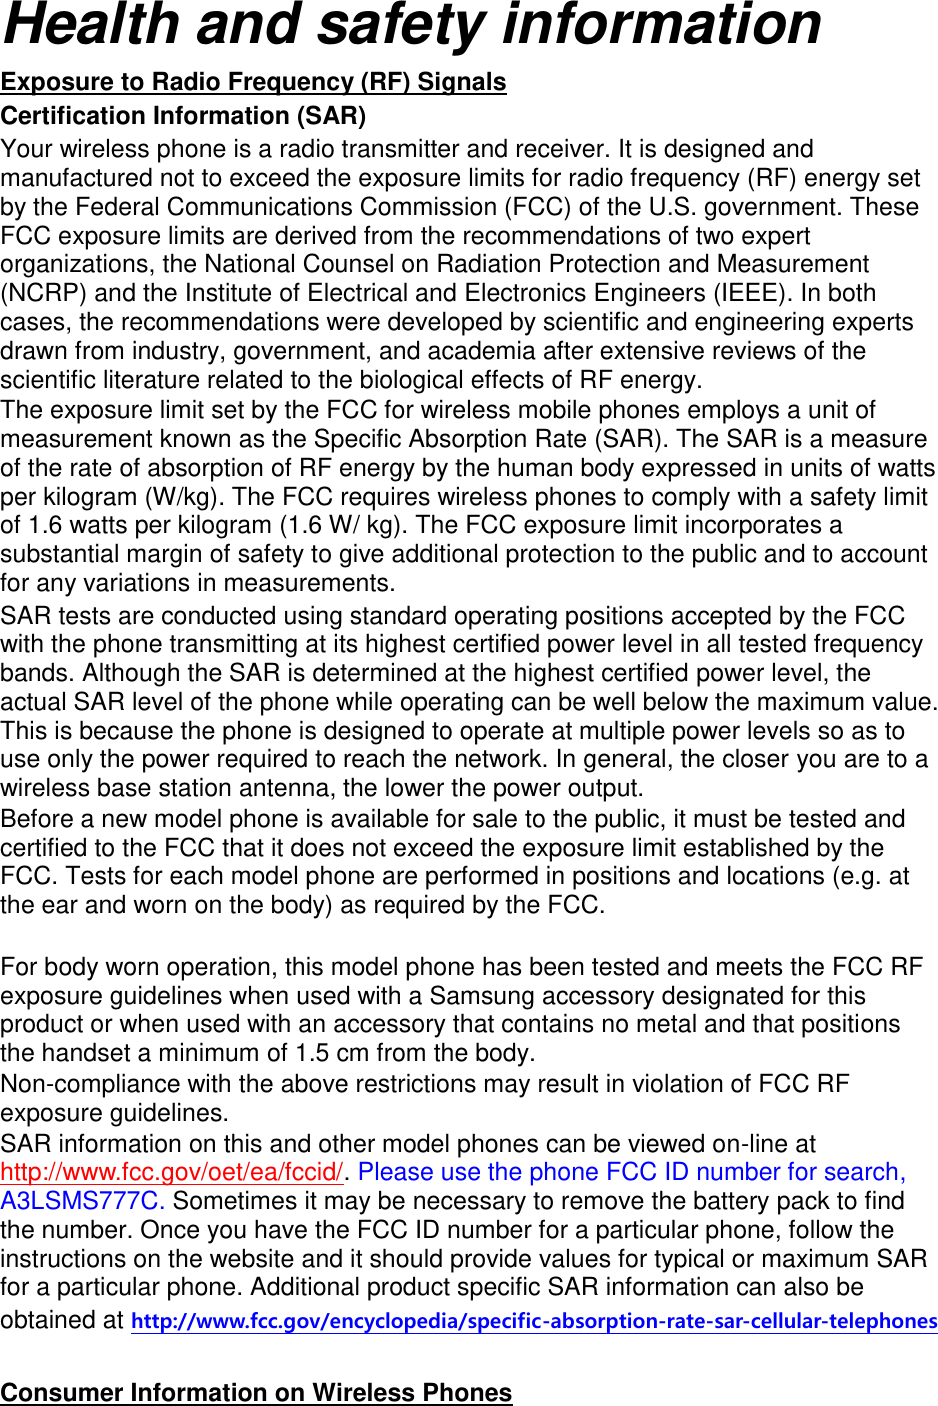 Health and safety information Exposure to Radio Frequency (RF) Signals Certification Information (SAR) Your wireless phone is a radio transmitter and receiver. It is designed and manufactured not to exceed the exposure limits for radio frequency (RF) energy set by the Federal Communications Commission (FCC) of the U.S. government. These FCC exposure limits are derived from the recommendations of two expert organizations, the National Counsel on Radiation Protection and Measurement (NCRP) and the Institute of Electrical and Electronics Engineers (IEEE). In both cases, the recommendations were developed by scientific and engineering experts drawn from industry, government, and academia after extensive reviews of the scientific literature related to the biological effects of RF energy. The exposure limit set by the FCC for wireless mobile phones employs a unit of measurement known as the Specific Absorption Rate (SAR). The SAR is a measure of the rate of absorption of RF energy by the human body expressed in units of watts per kilogram (W/kg). The FCC requires wireless phones to comply with a safety limit of 1.6 watts per kilogram (1.6 W/ kg). The FCC exposure limit incorporates a substantial margin of safety to give additional protection to the public and to account for any variations in measurements. SAR tests are conducted using standard operating positions accepted by the FCC with the phone transmitting at its highest certified power level in all tested frequency bands. Although the SAR is determined at the highest certified power level, the actual SAR level of the phone while operating can be well below the maximum value. This is because the phone is designed to operate at multiple power levels so as to use only the power required to reach the network. In general, the closer you are to a wireless base station antenna, the lower the power output. Before a new model phone is available for sale to the public, it must be tested and certified to the FCC that it does not exceed the exposure limit established by the FCC. Tests for each model phone are performed in positions and locations (e.g. at the ear and worn on the body) as required by the FCC.      For body worn operation, this model phone has been tested and meets the FCC RF exposure guidelines when used with a Samsung accessory designated for this product or when used with an accessory that contains no metal and that positions the handset a minimum of 1.5 cm from the body.   Non-compliance with the above restrictions may result in violation of FCC RF exposure guidelines. SAR information on this and other model phones can be viewed on-line at http://www.fcc.gov/oet/ea/fccid/. Please use the phone FCC ID number for search, A3LSMS777C. Sometimes it may be necessary to remove the battery pack to find the number. Once you have the FCC ID number for a particular phone, follow the instructions on the website and it should provide values for typical or maximum SAR for a particular phone. Additional product specific SAR information can also be obtained at http://www.fcc.gov/encyclopedia/specific-absorption-rate-sar-cellular-telephones  Consumer Information on Wireless Phones 